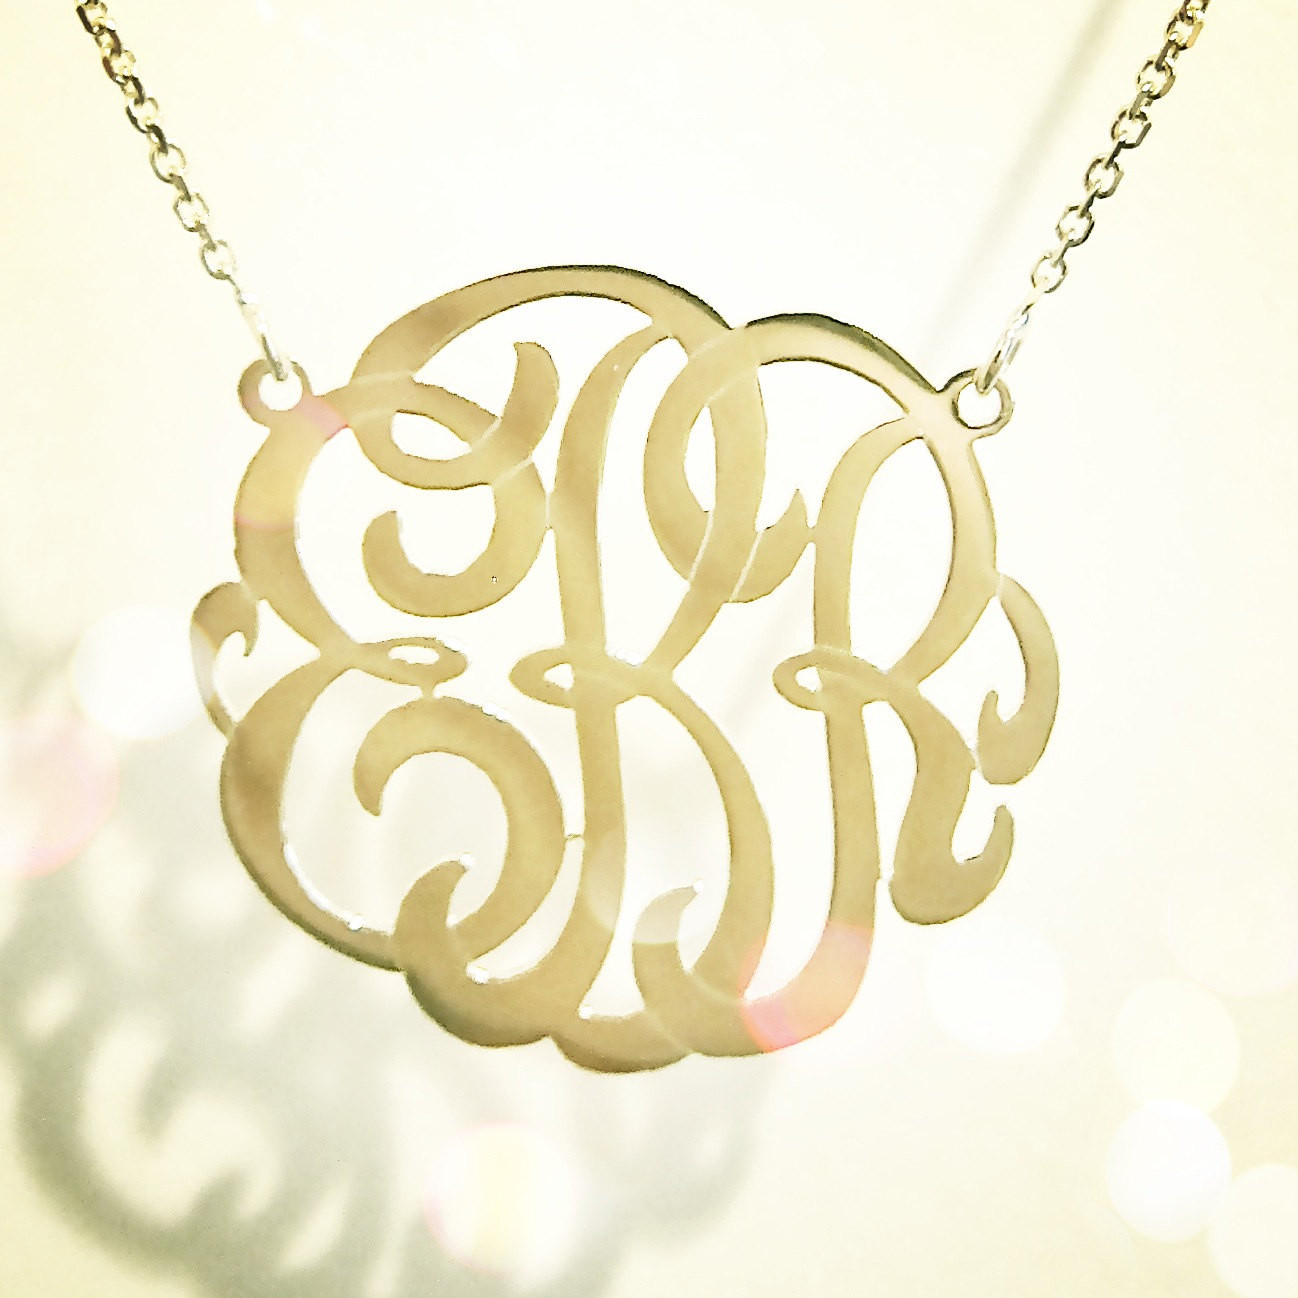 Monogram Necklace Gold
 Small 14k Gold Monogram Necklace yellow rose or white gold